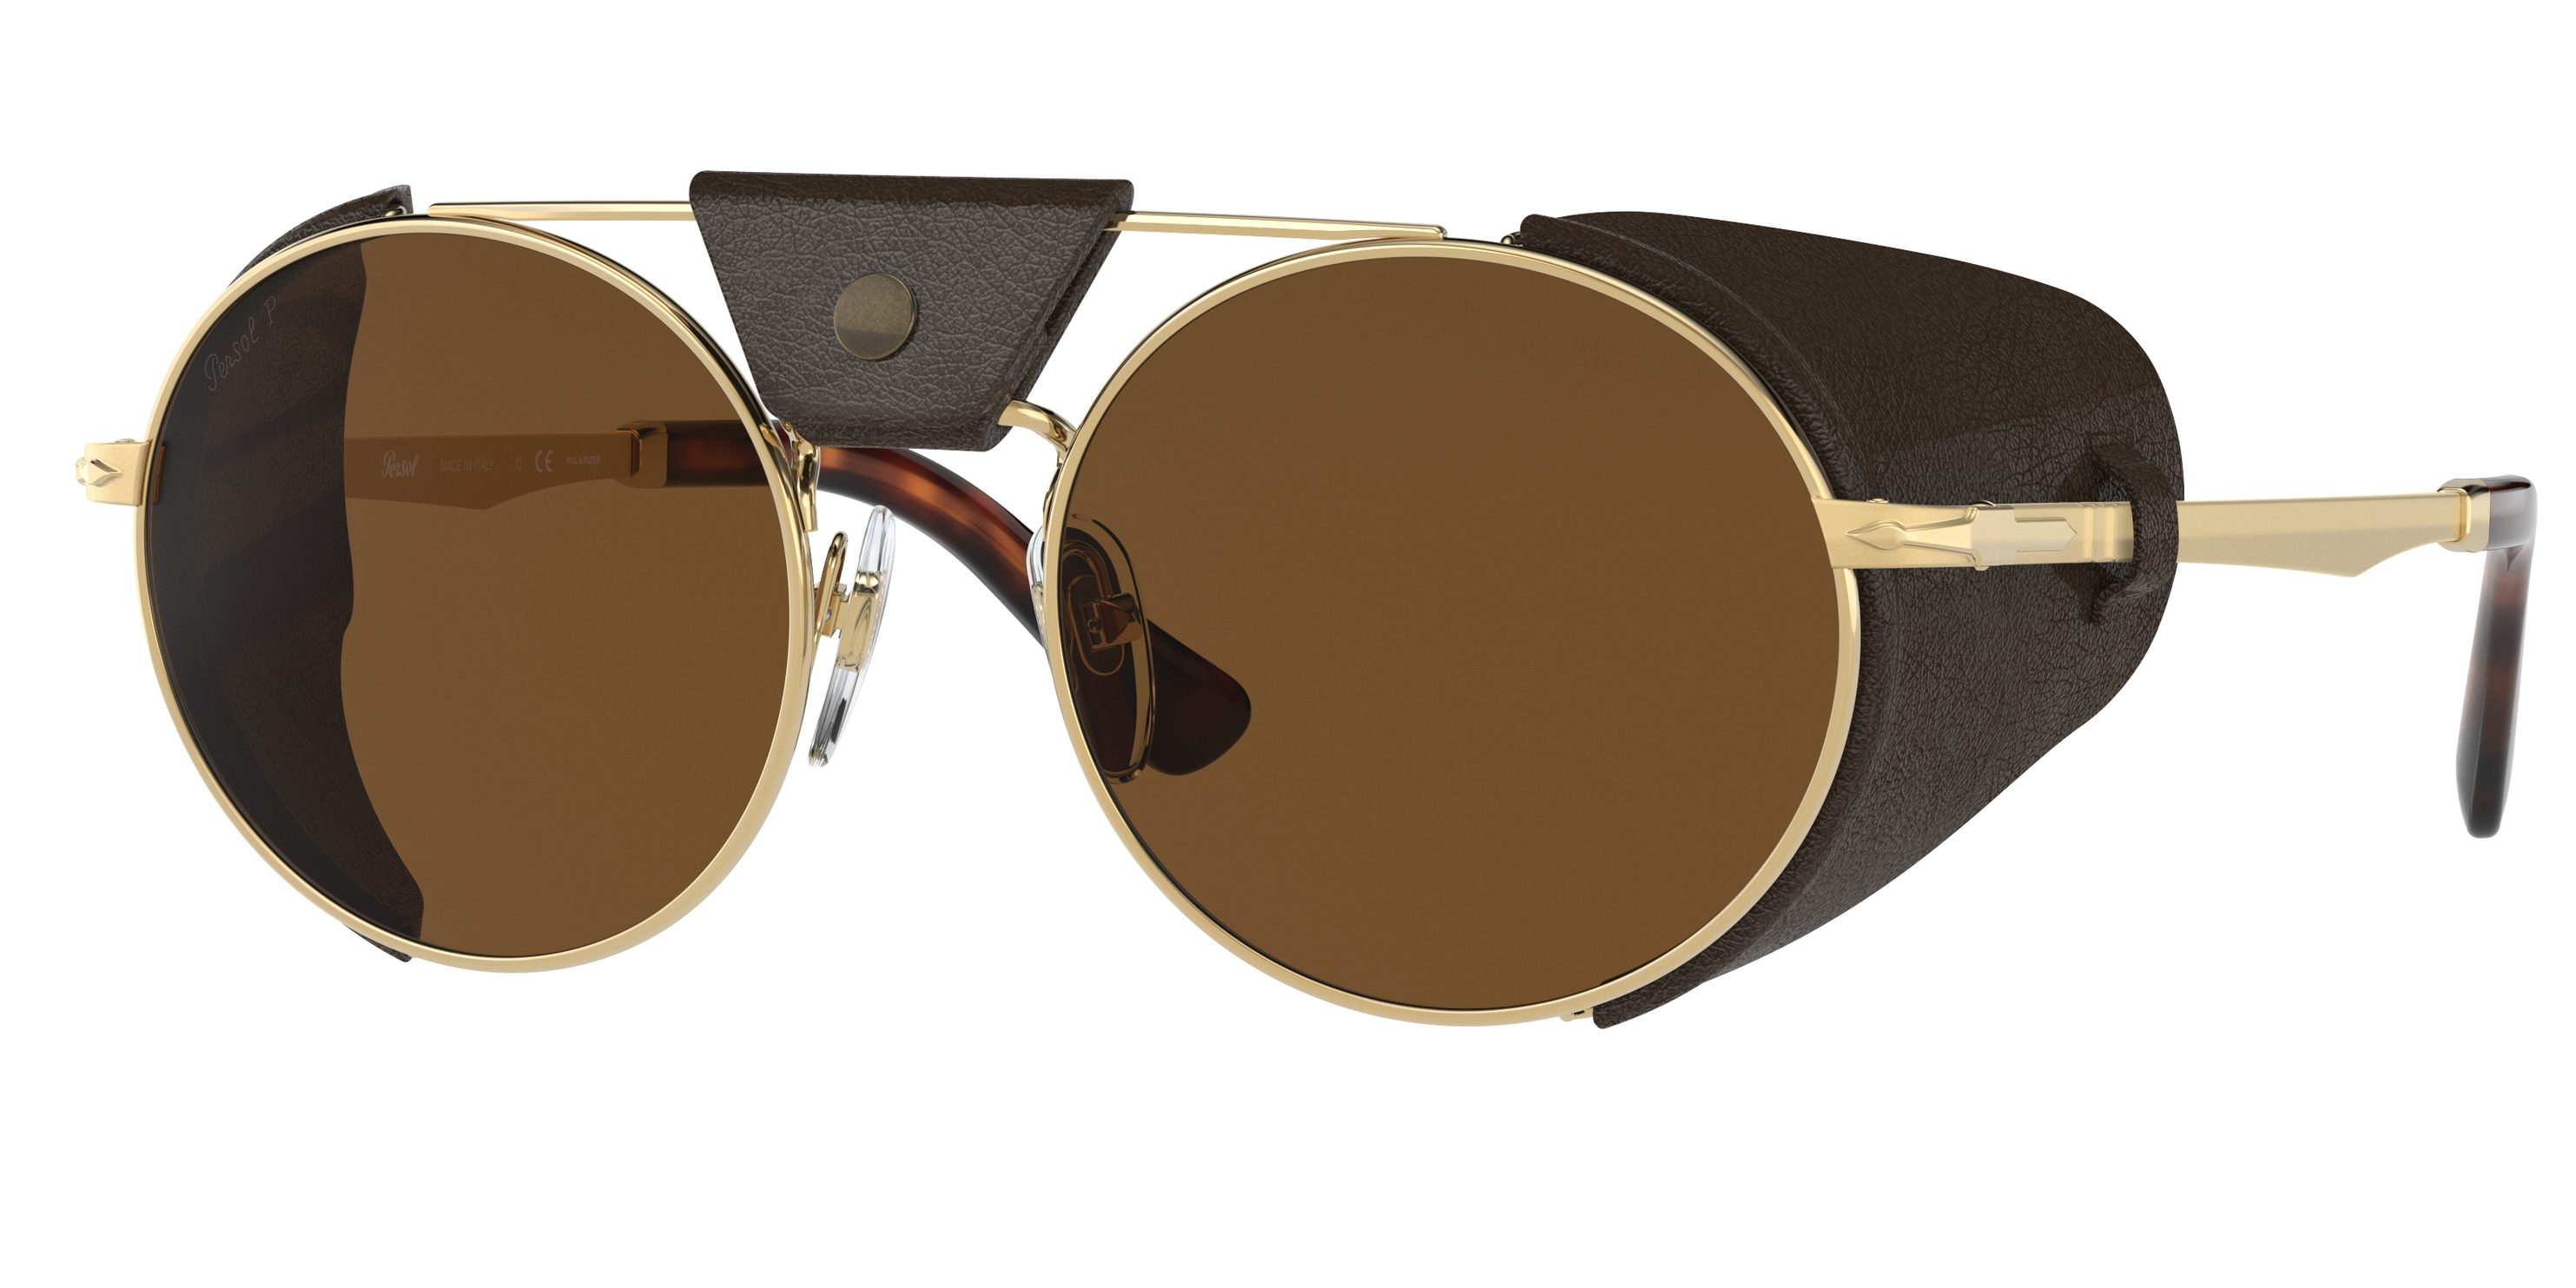 Persol New Protector PO2496SZ sunglasses review